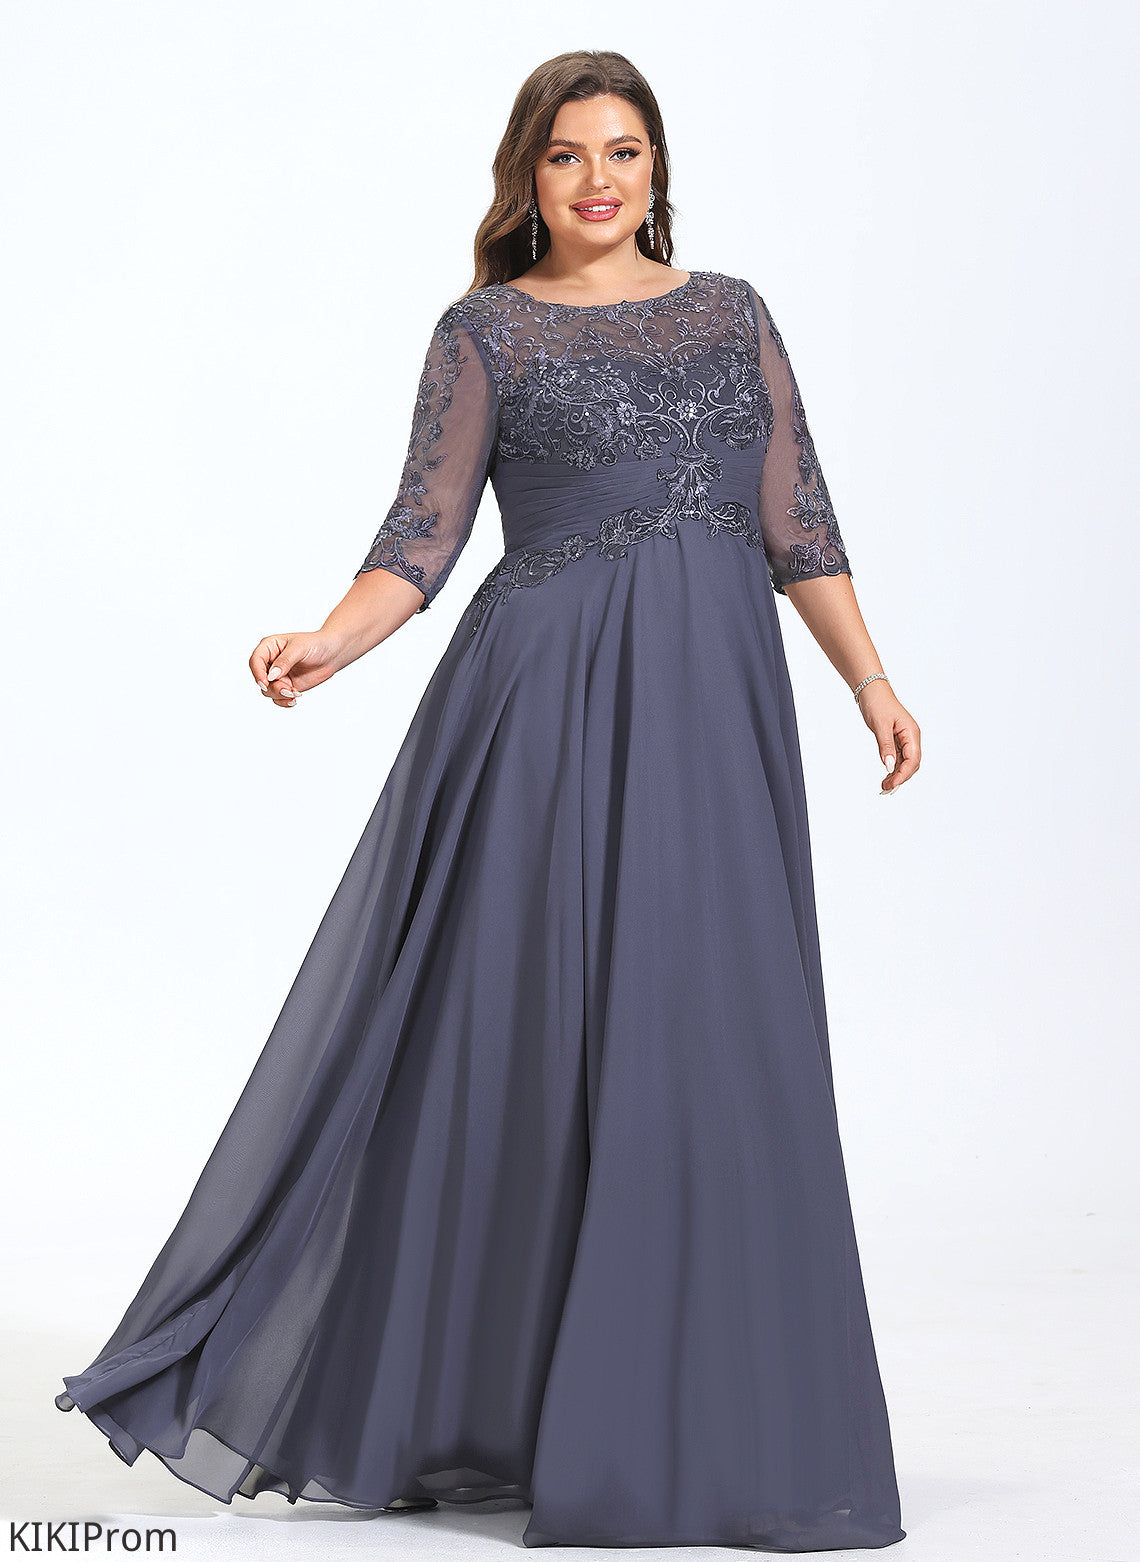 With Prom Dresses Lace Scoop Floor-Length Adyson Sequins A-Line Chiffon